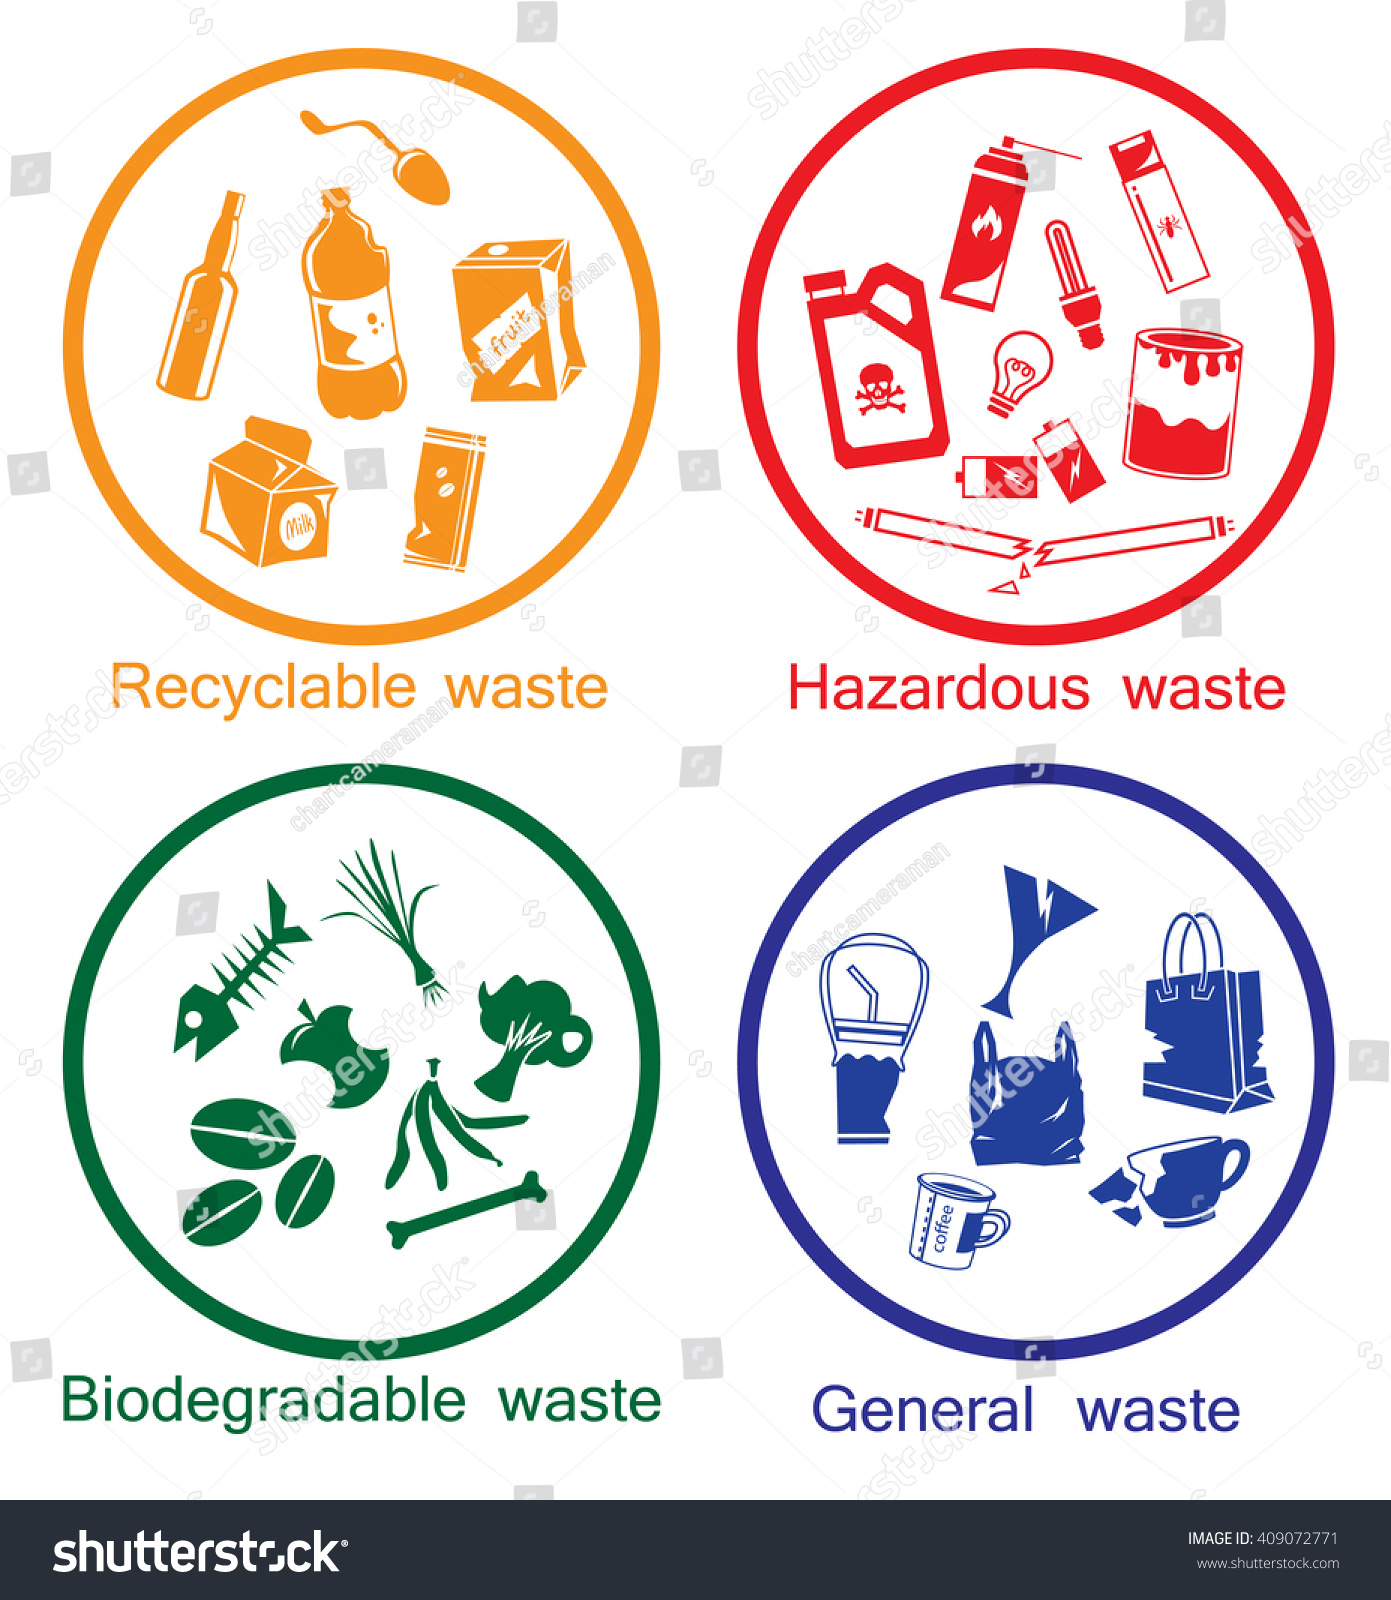 Stock Vector Colorful Waste Types Icon Set Recyclable Hazardous Biodegradable And General Waste Symbol For 409072771 